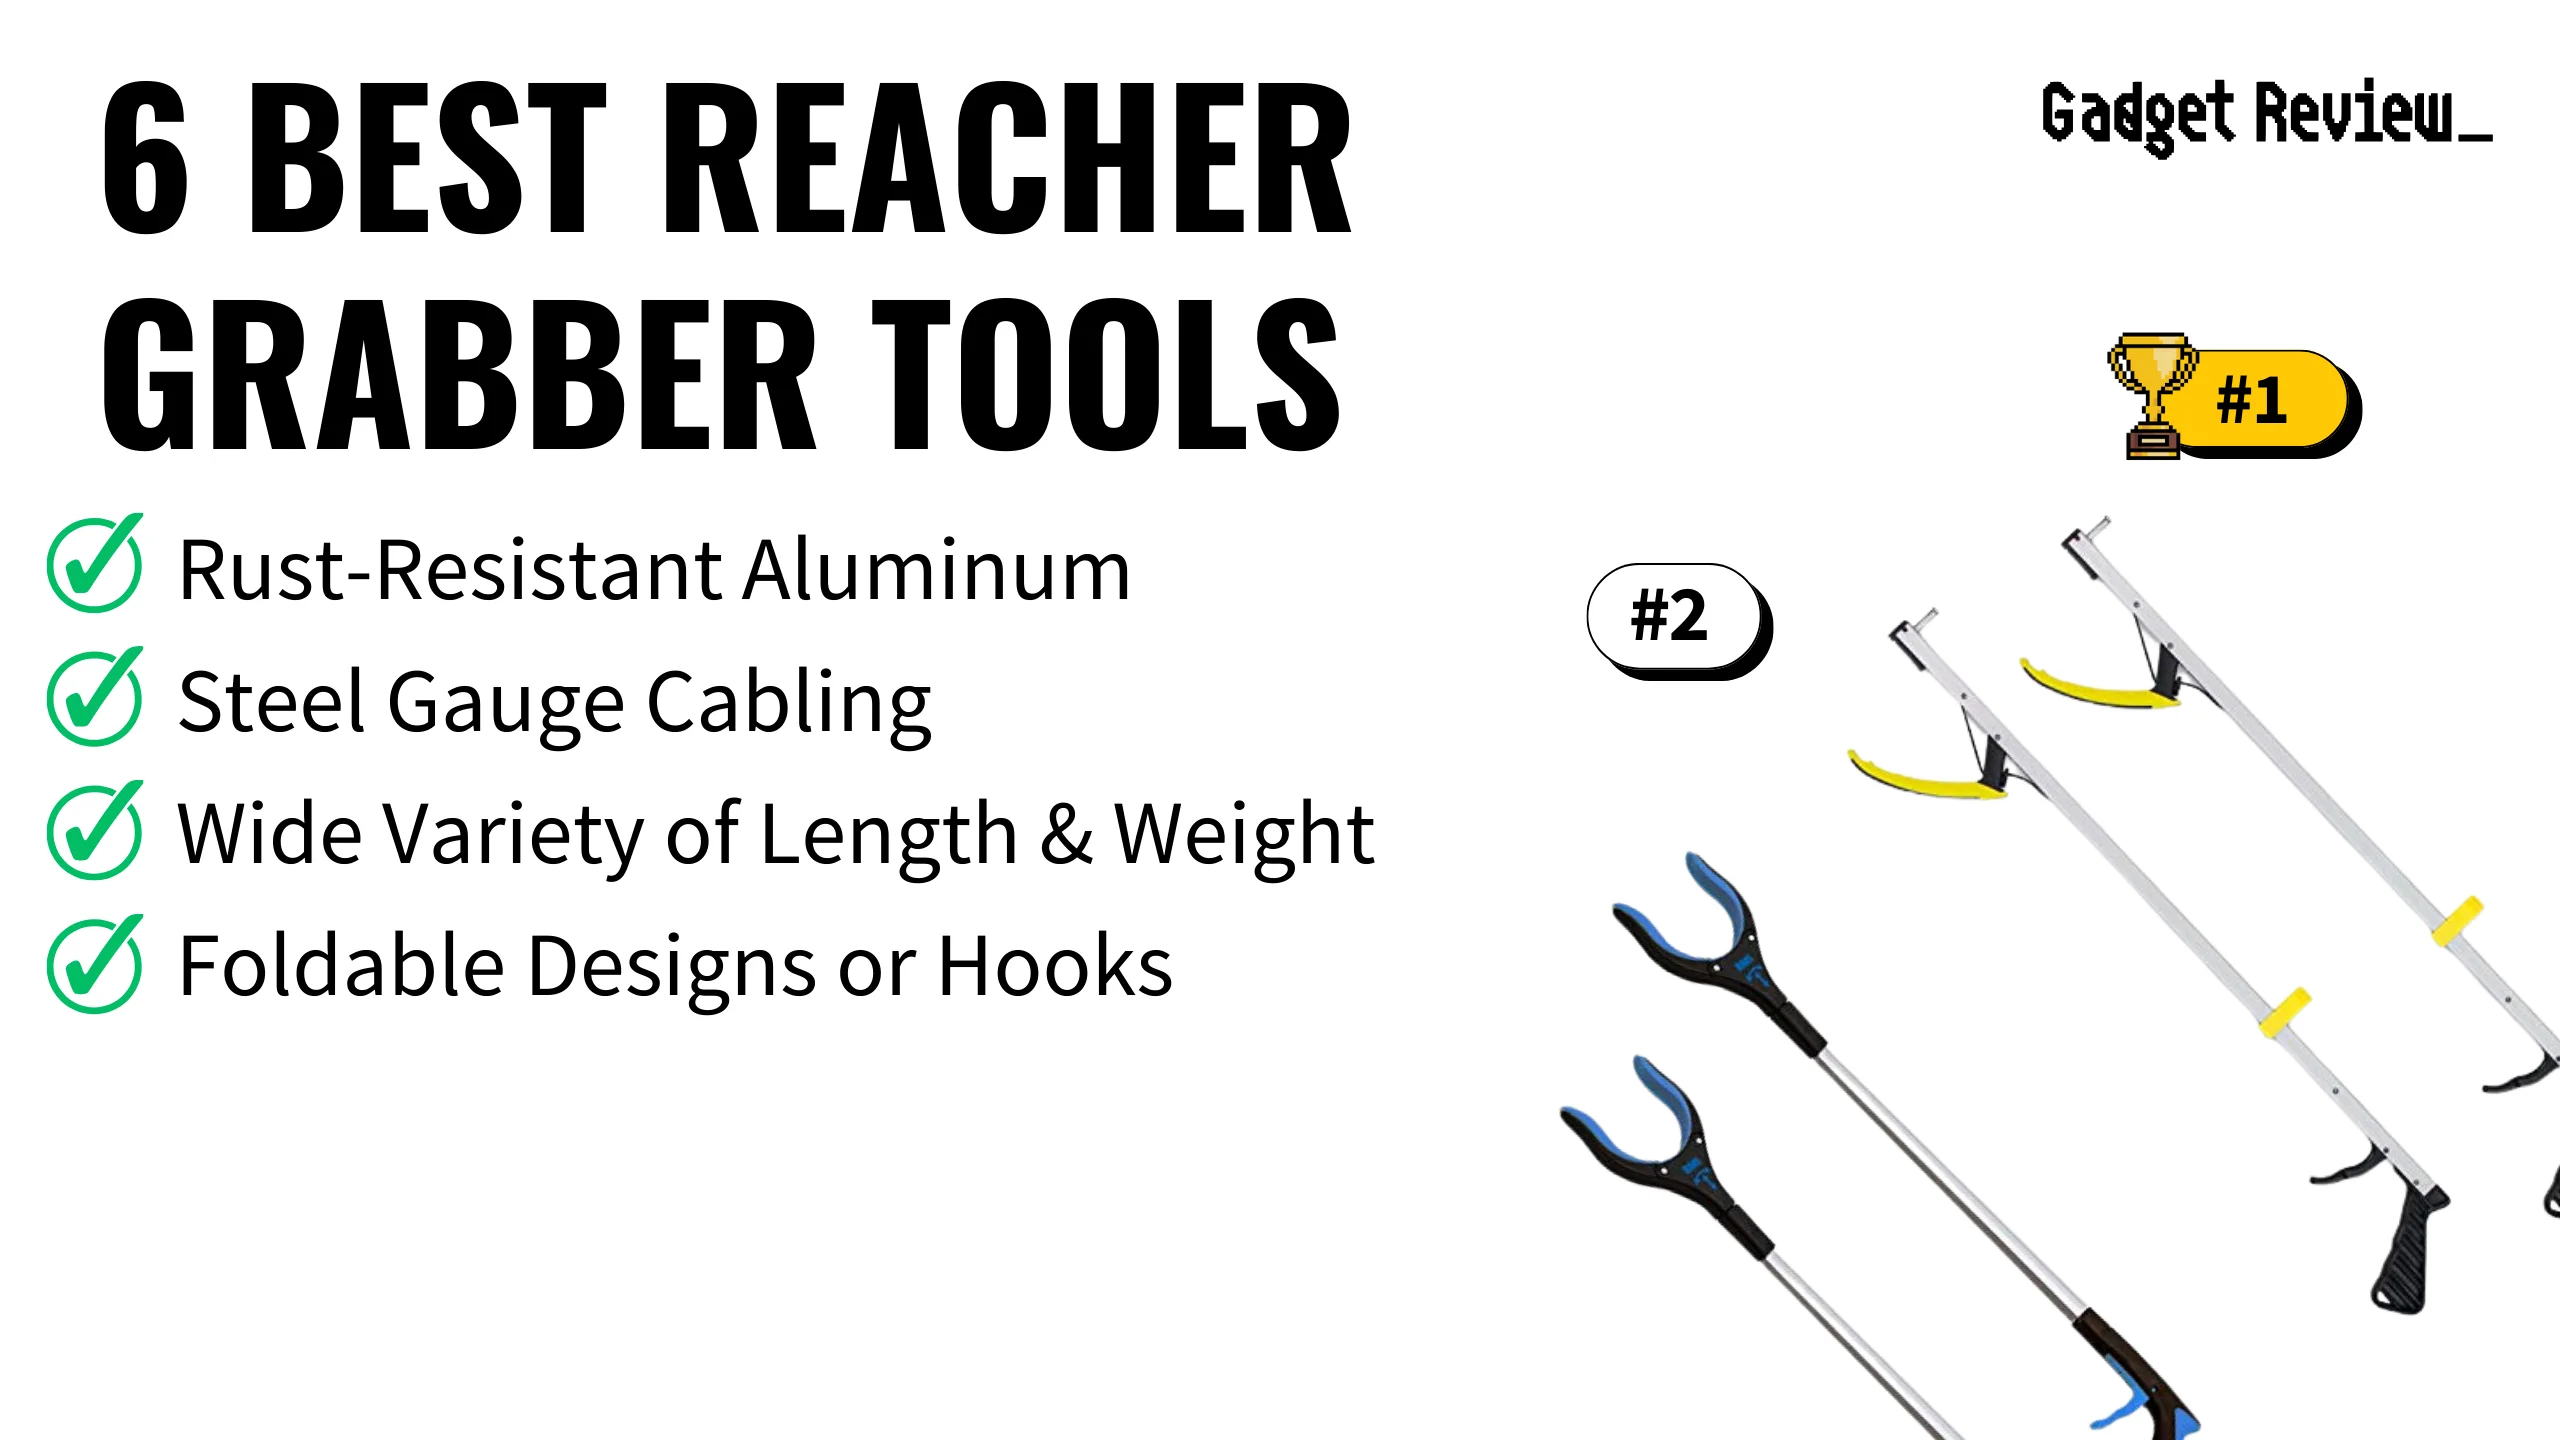 best reacher grabber tool featured image that shows the top three best health & wellnes models